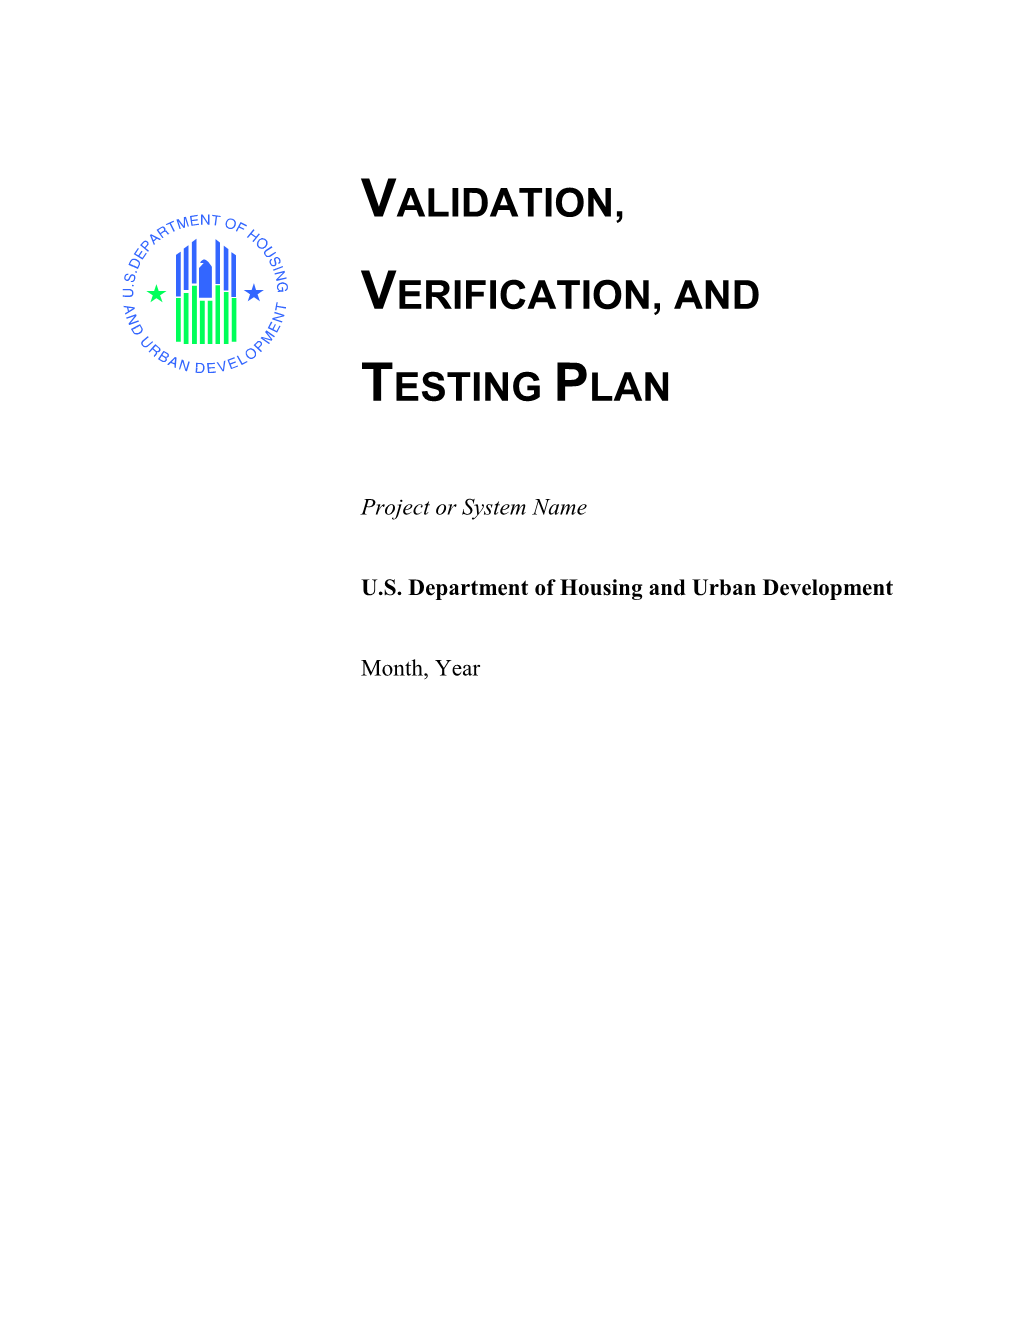 Validation, Verification, and Testing Plan Template